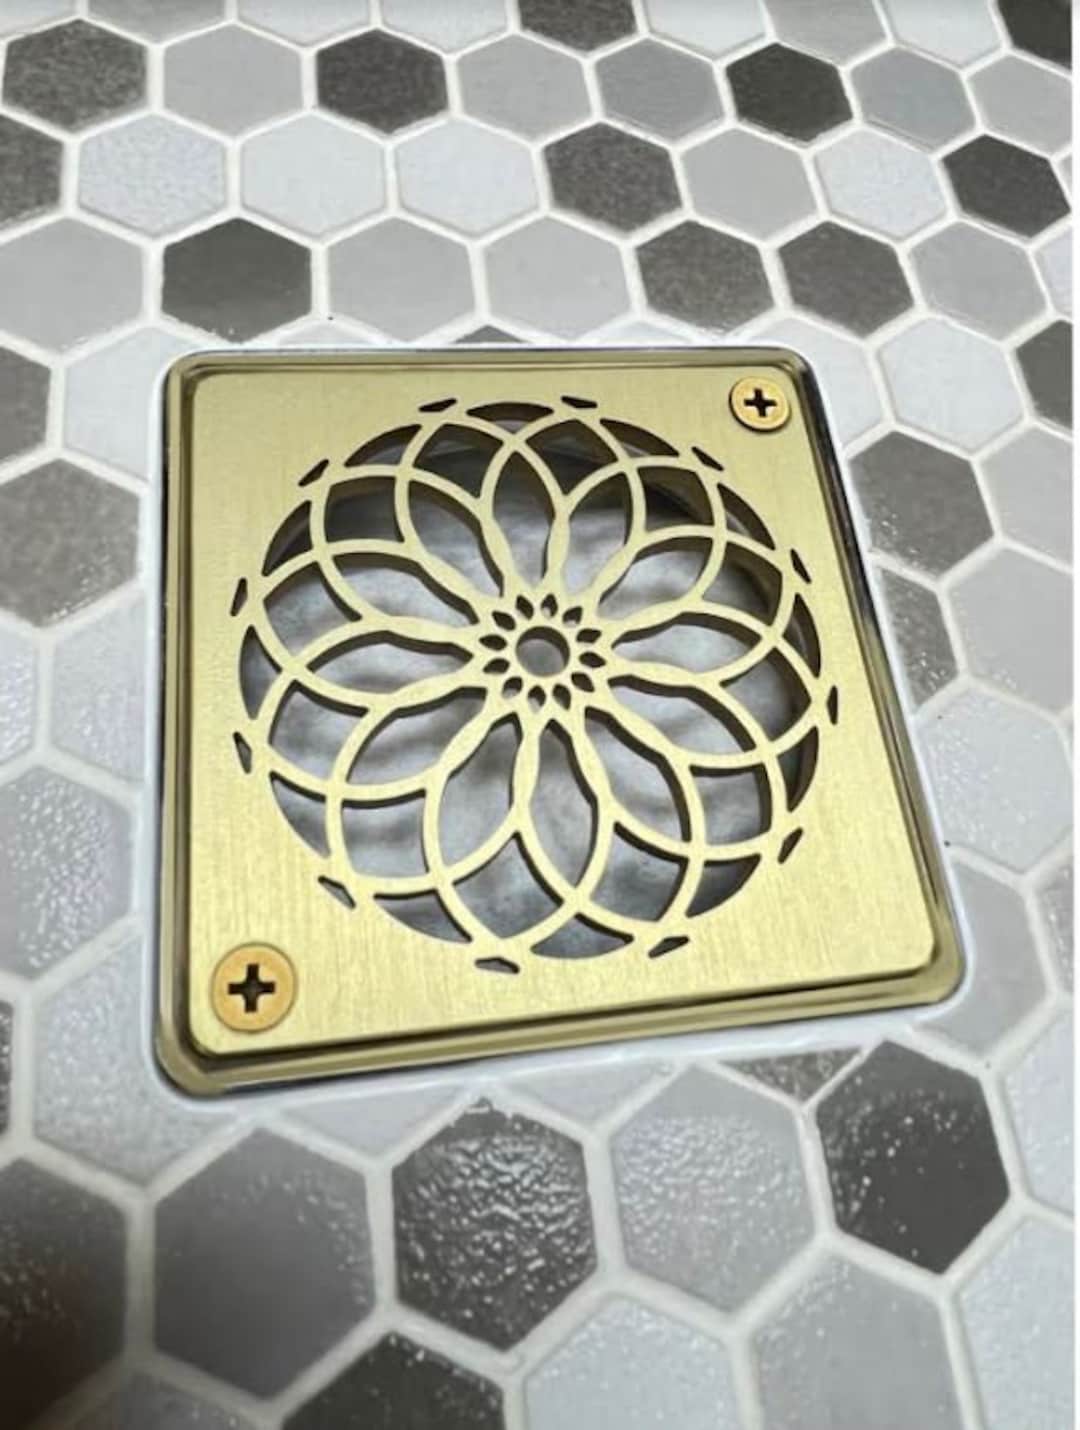 Square Shower Drain Cover, Replacement for Schluter-kerdi, Geometric Design  by Designer Drains 